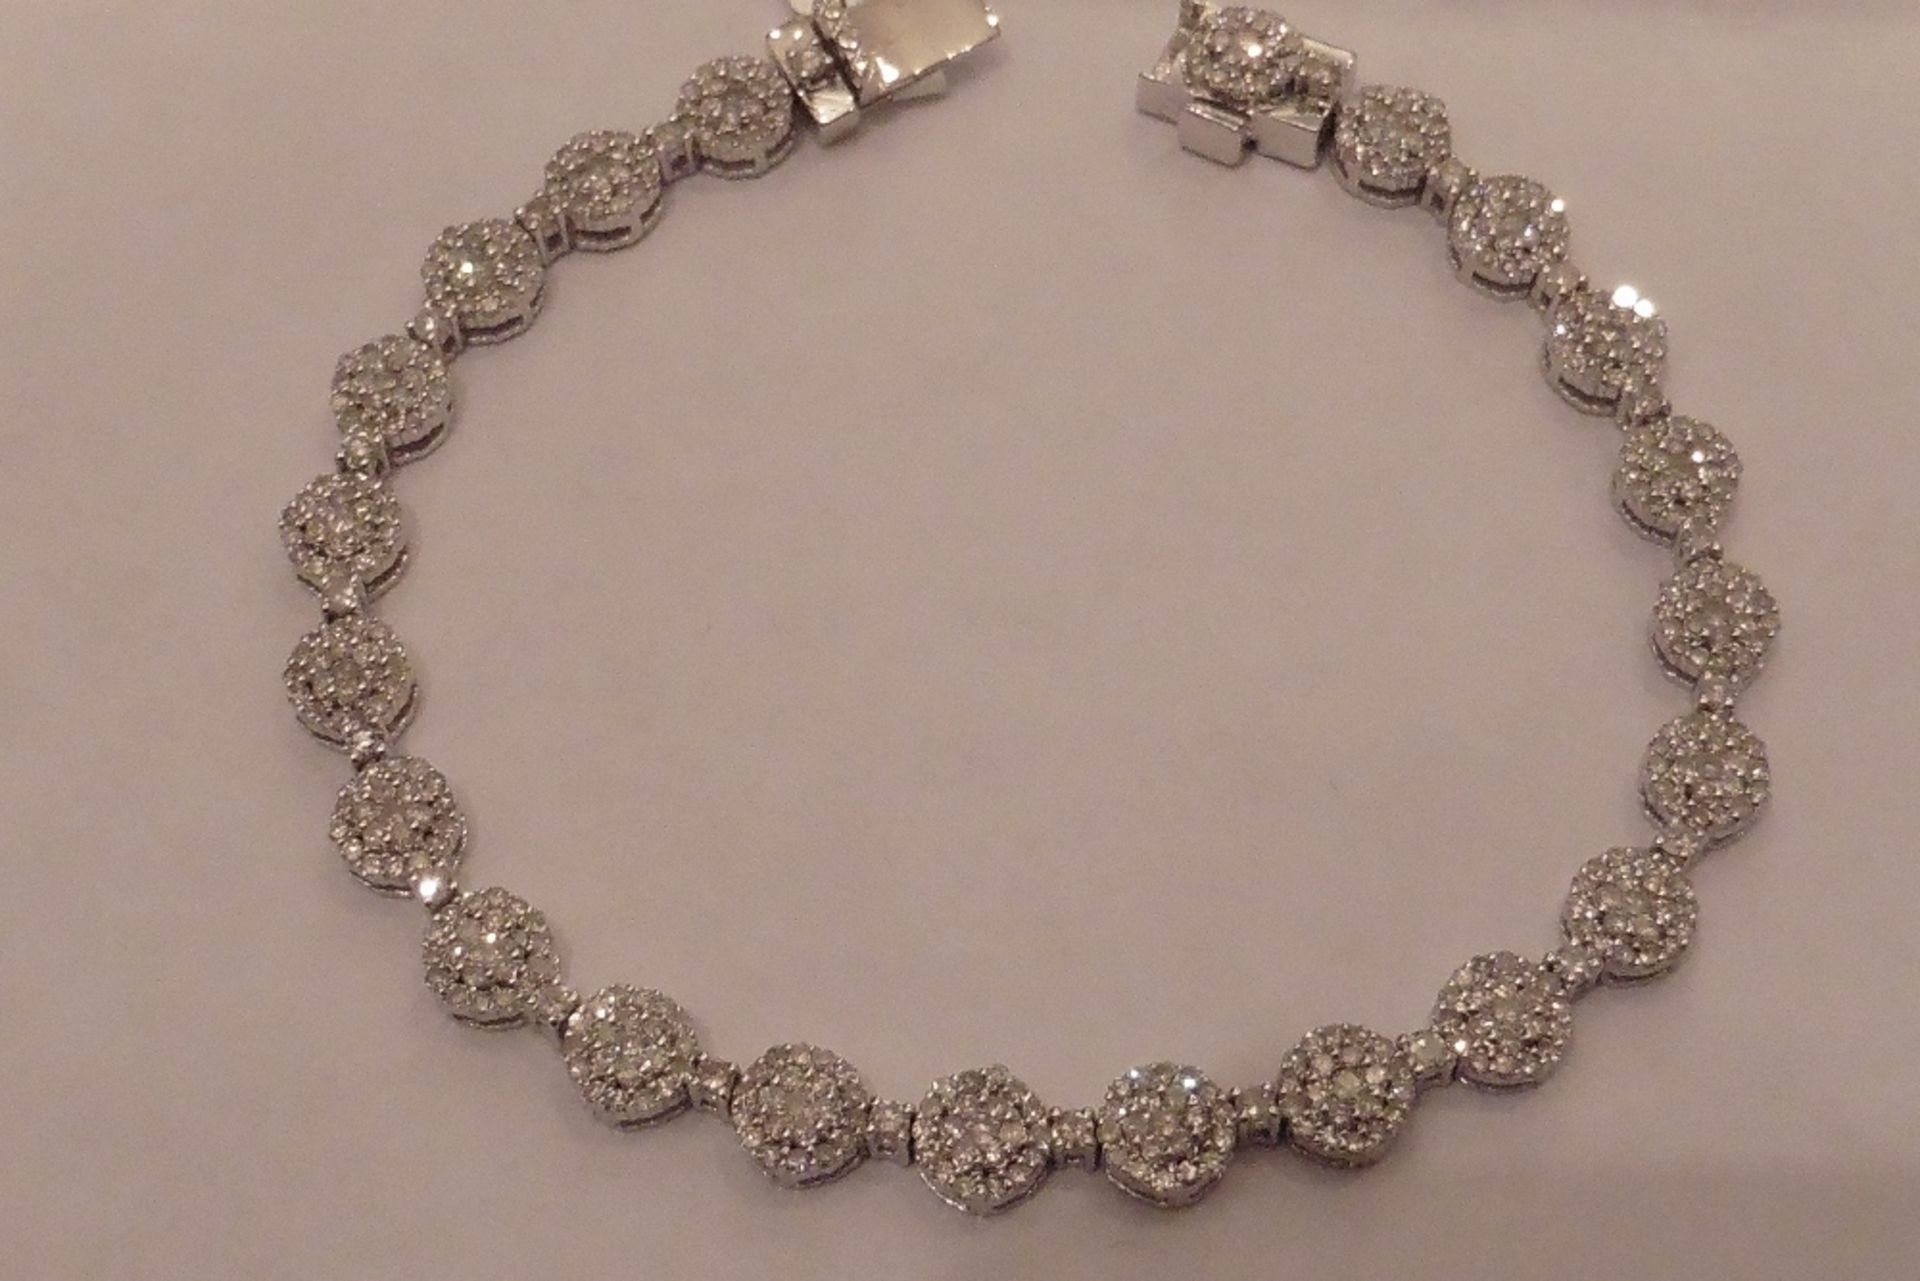 9ct white gold fancy diamond bracelet set with clusters of small round cut diamonds of I1/I2 clarity